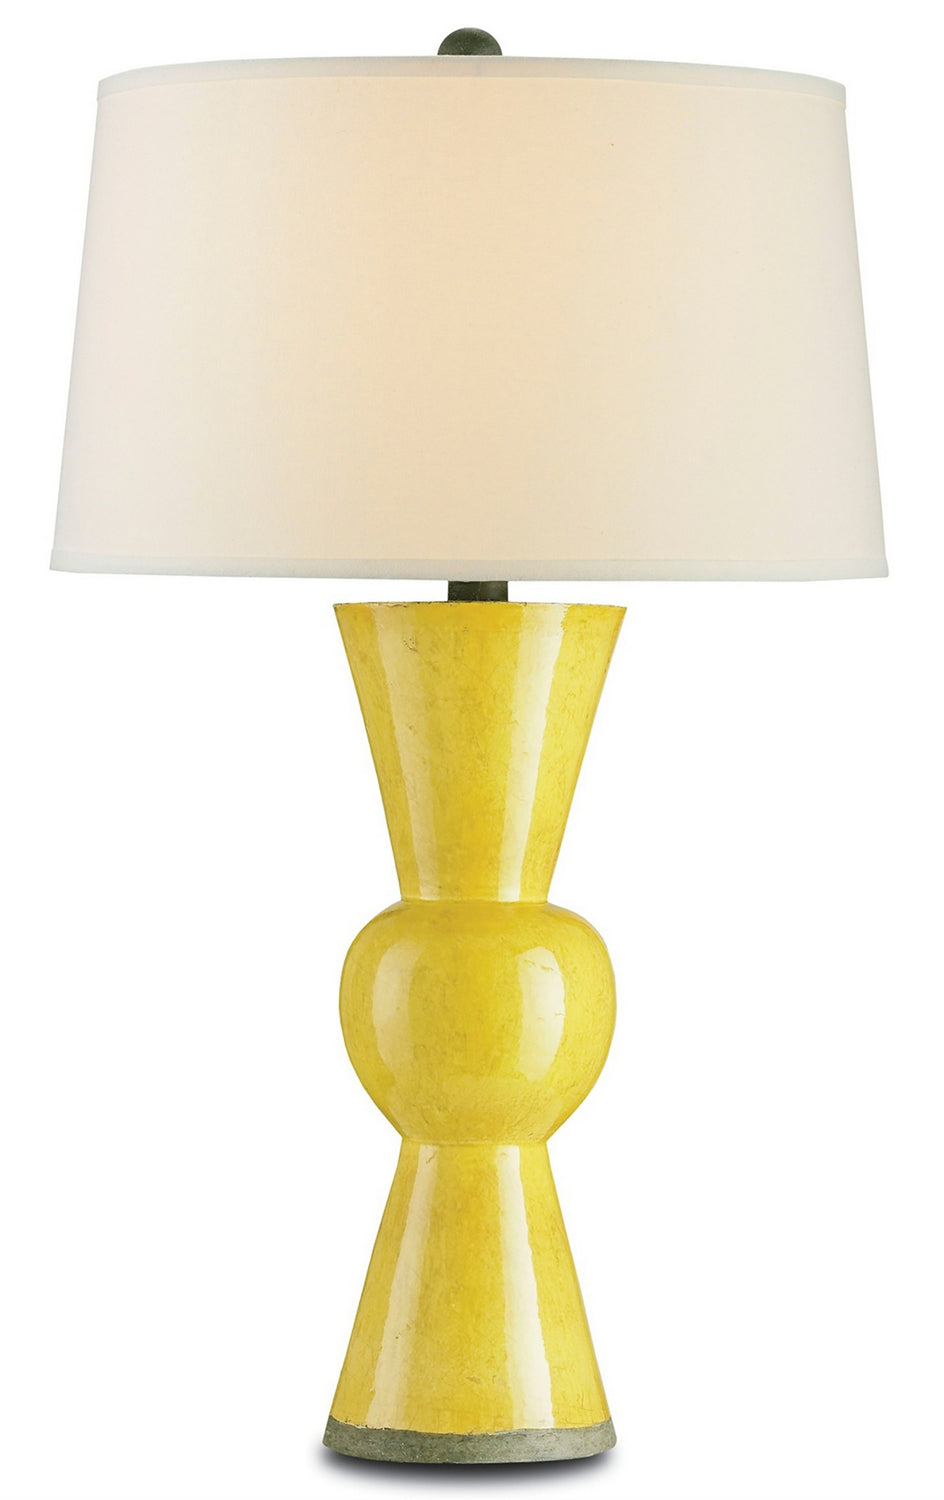 Currey and Company - 6382 - One Light Table Lamp - Upbeat